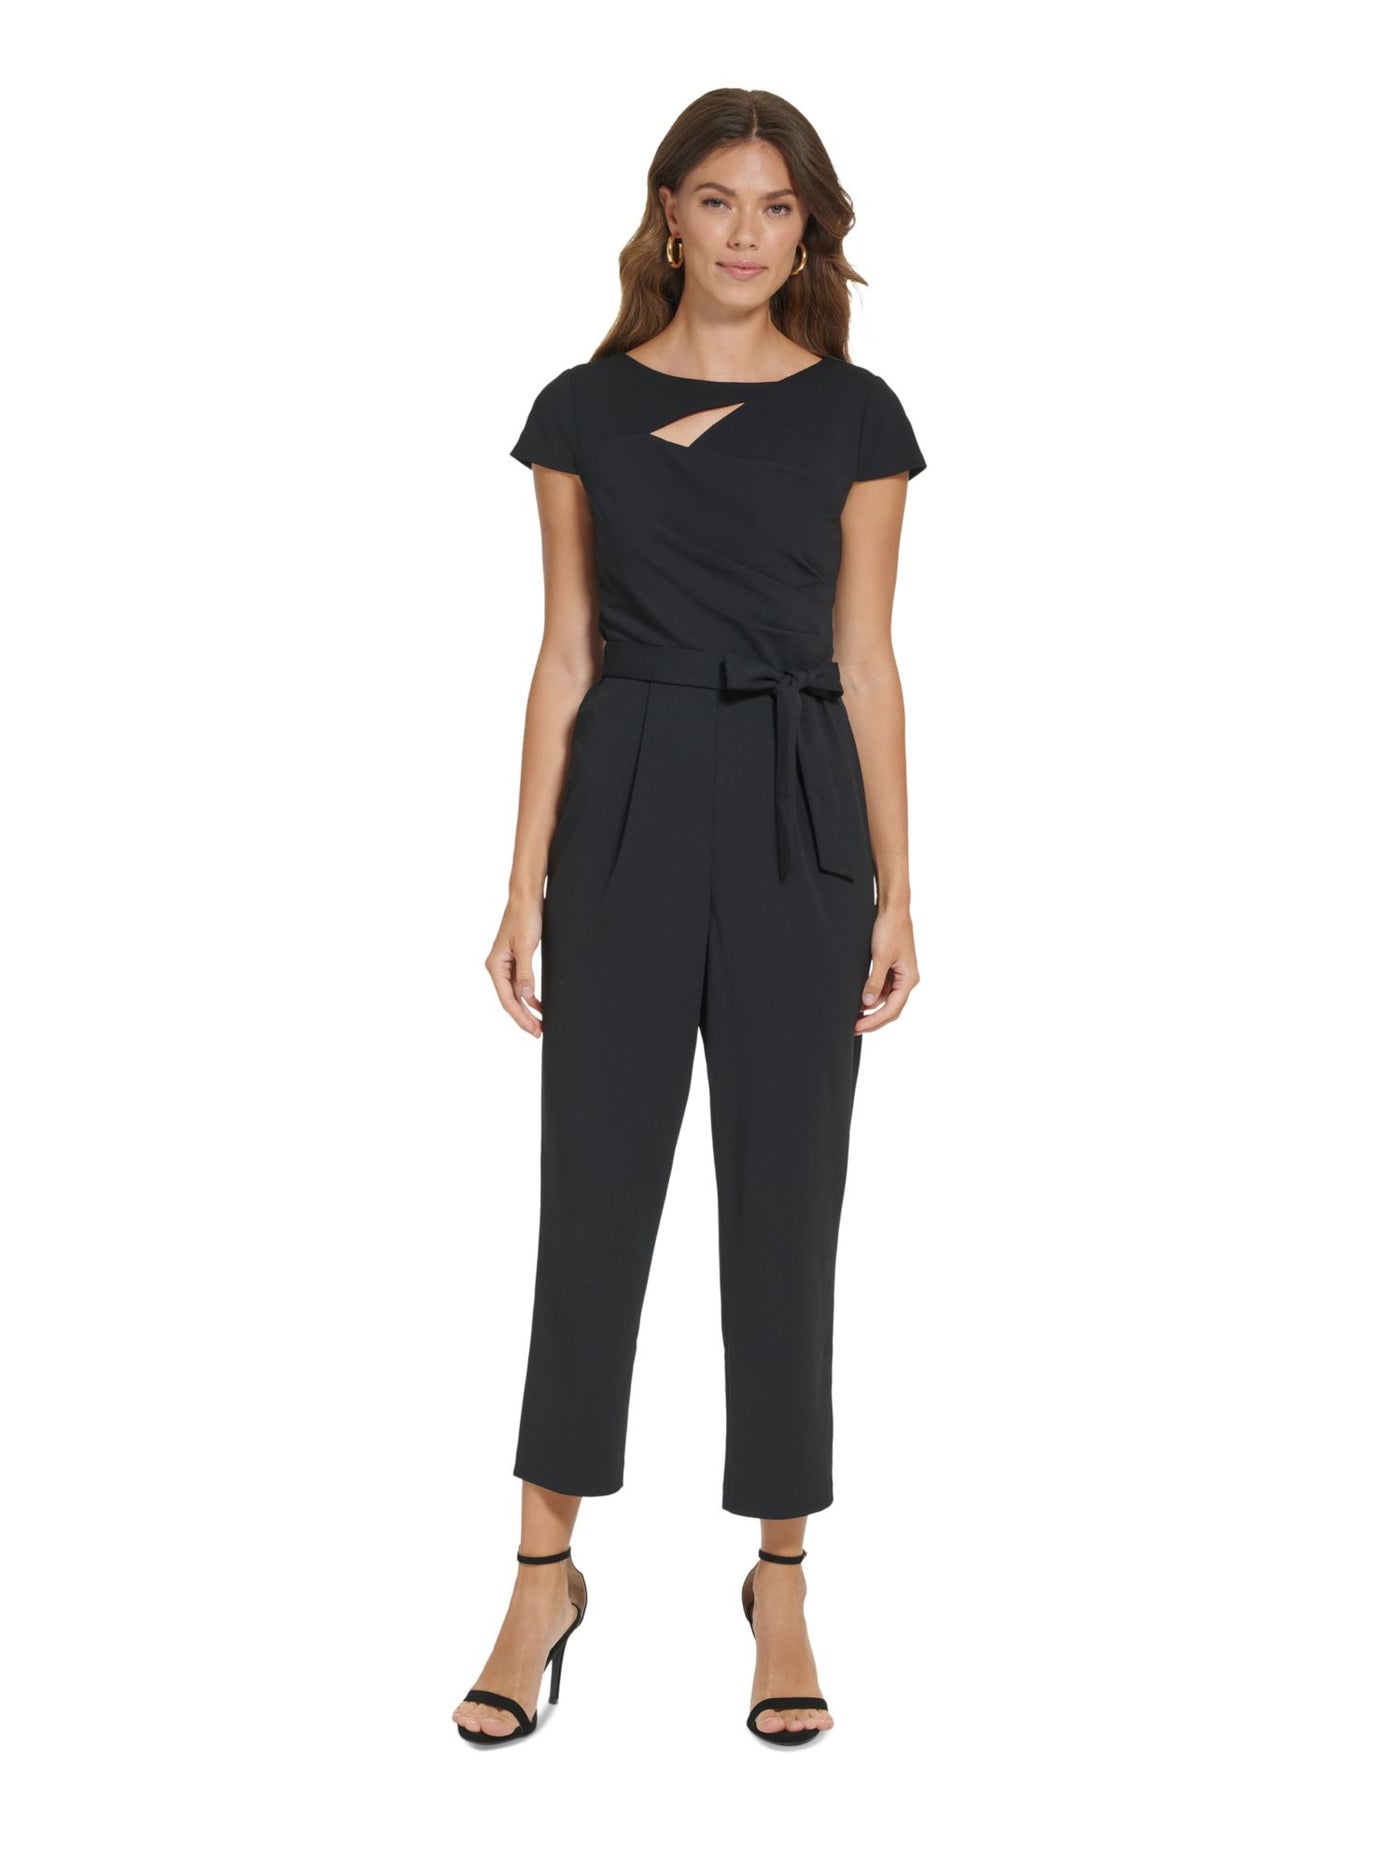 DKNY Womens Black Cut Out Zippered Tie-belt Pleated Cap Sleeve Boat Neck Wear To Work Cropped Jumpsuit 8